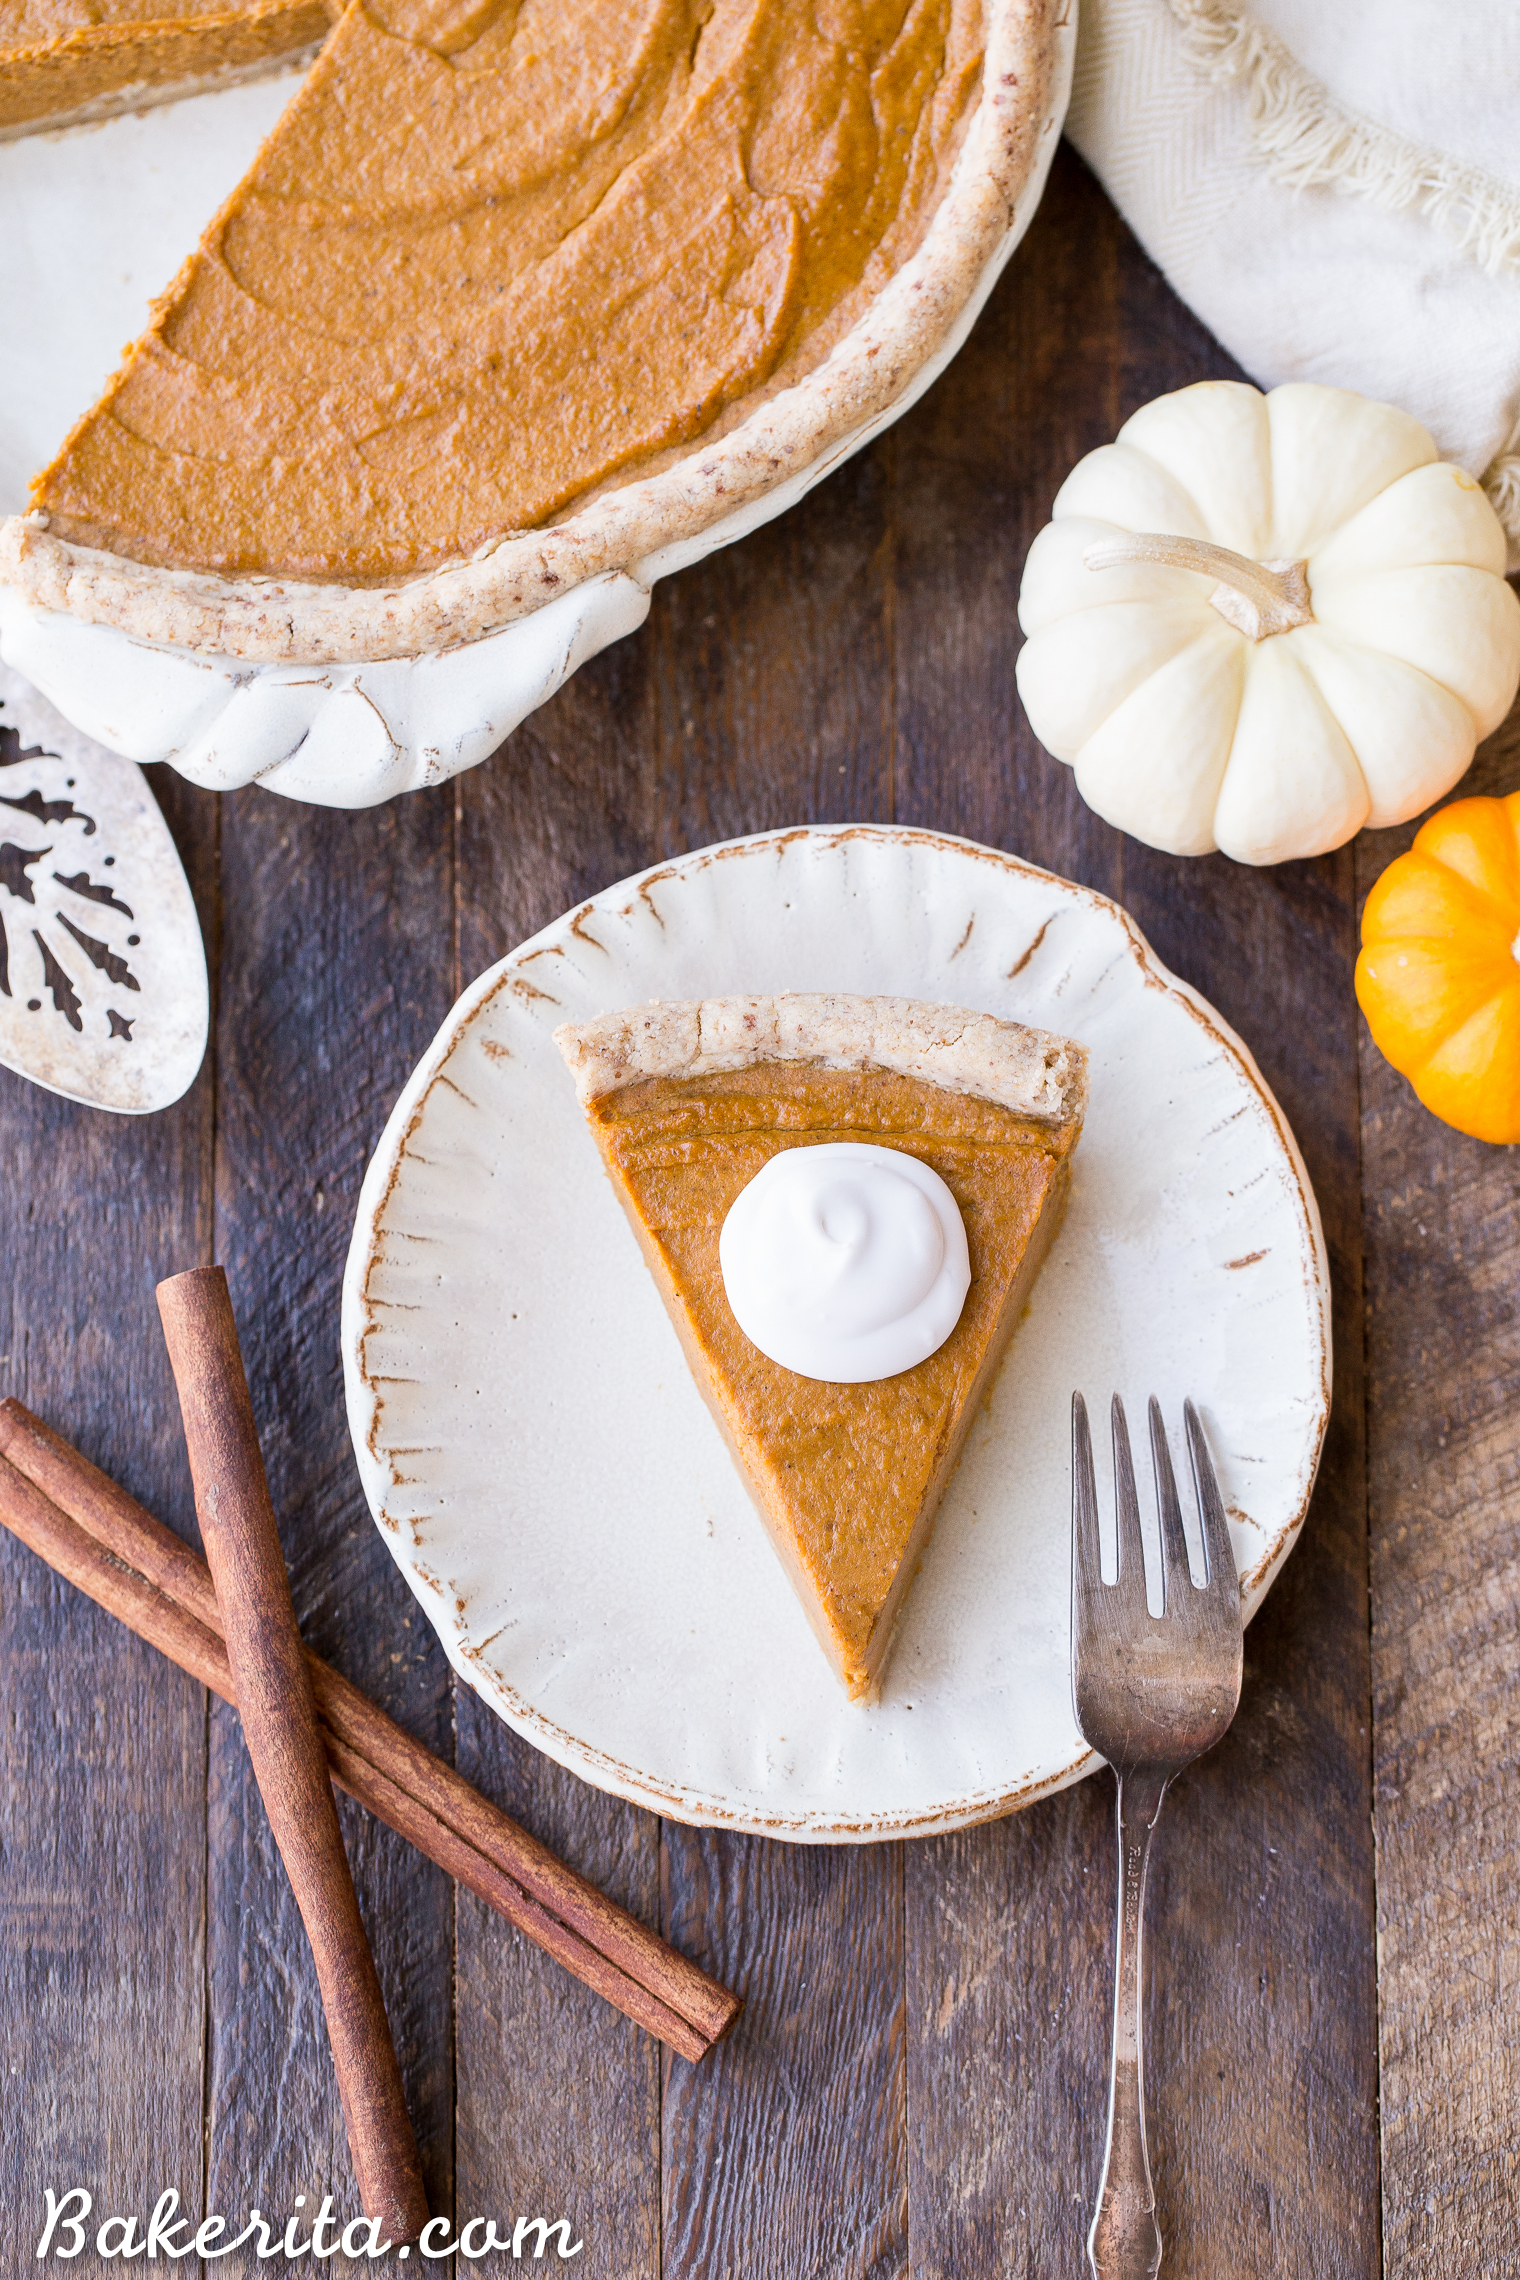 This Paleo + Vegan Pumpkin Pie is smooth, creamy, and perfectly spiced, with a flaky crust that you'd never believe is gluten-free, paleo AND vegan. This is allergy-friendly pie will be a holiday dessert staple.